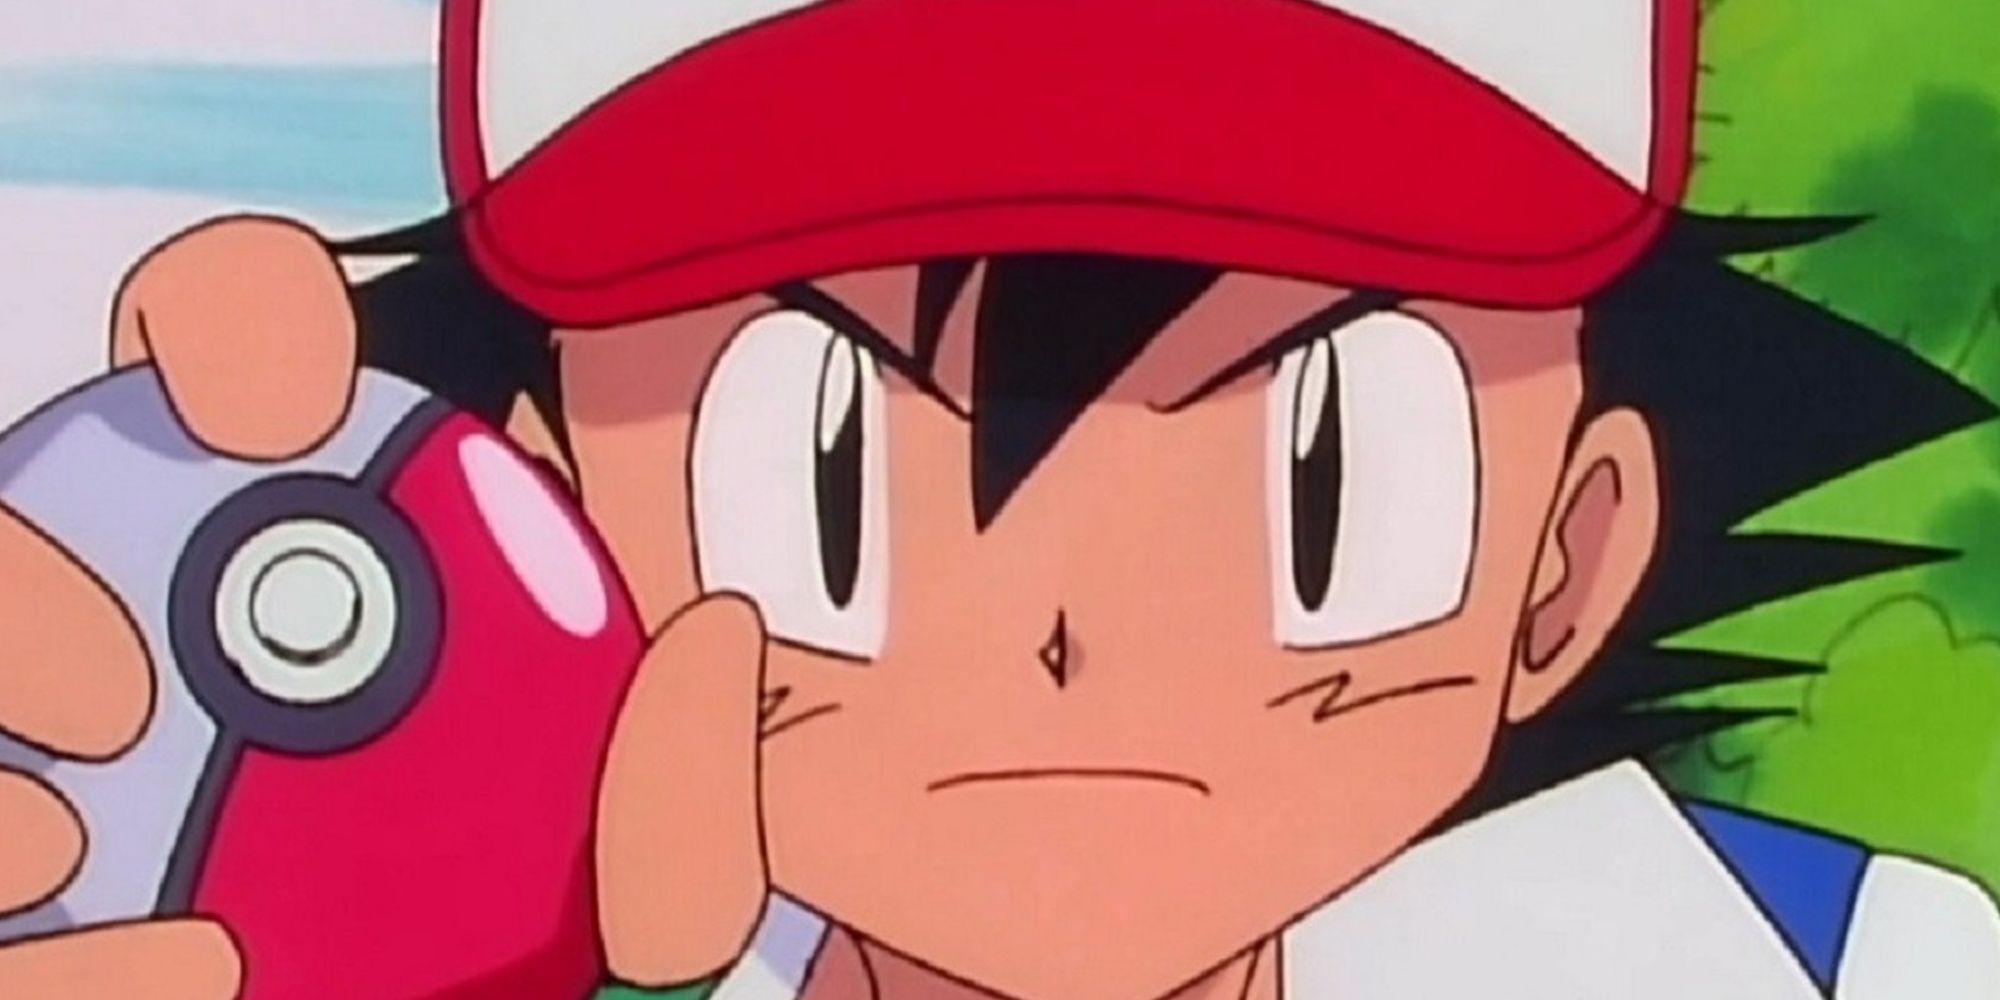 ash holding a pokeball in the pokemon anime